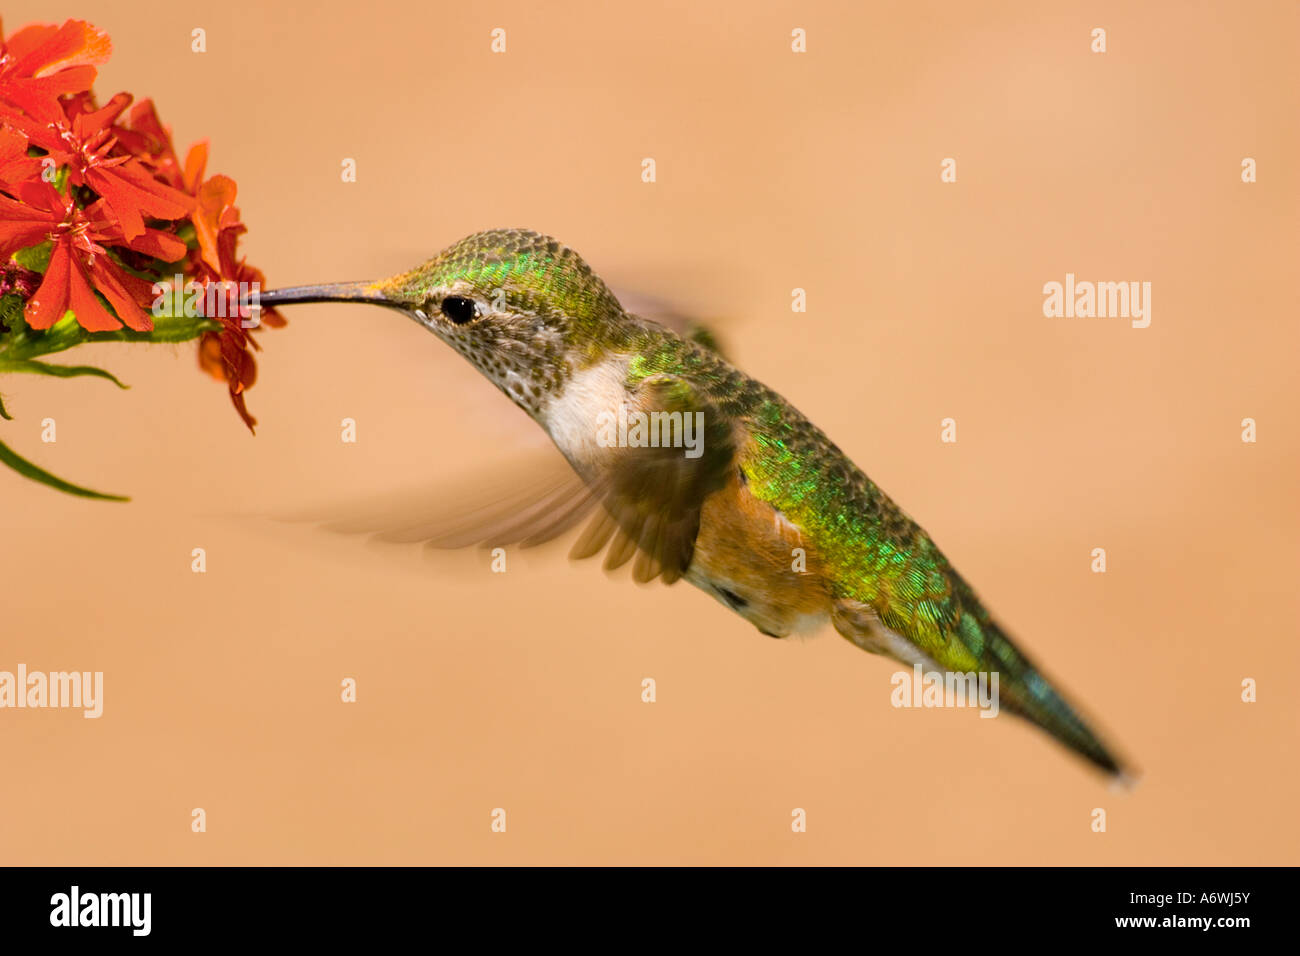 A female Rufous Hummingbird sips nectar from a flower in Leadville, Colorado. Stock Photo